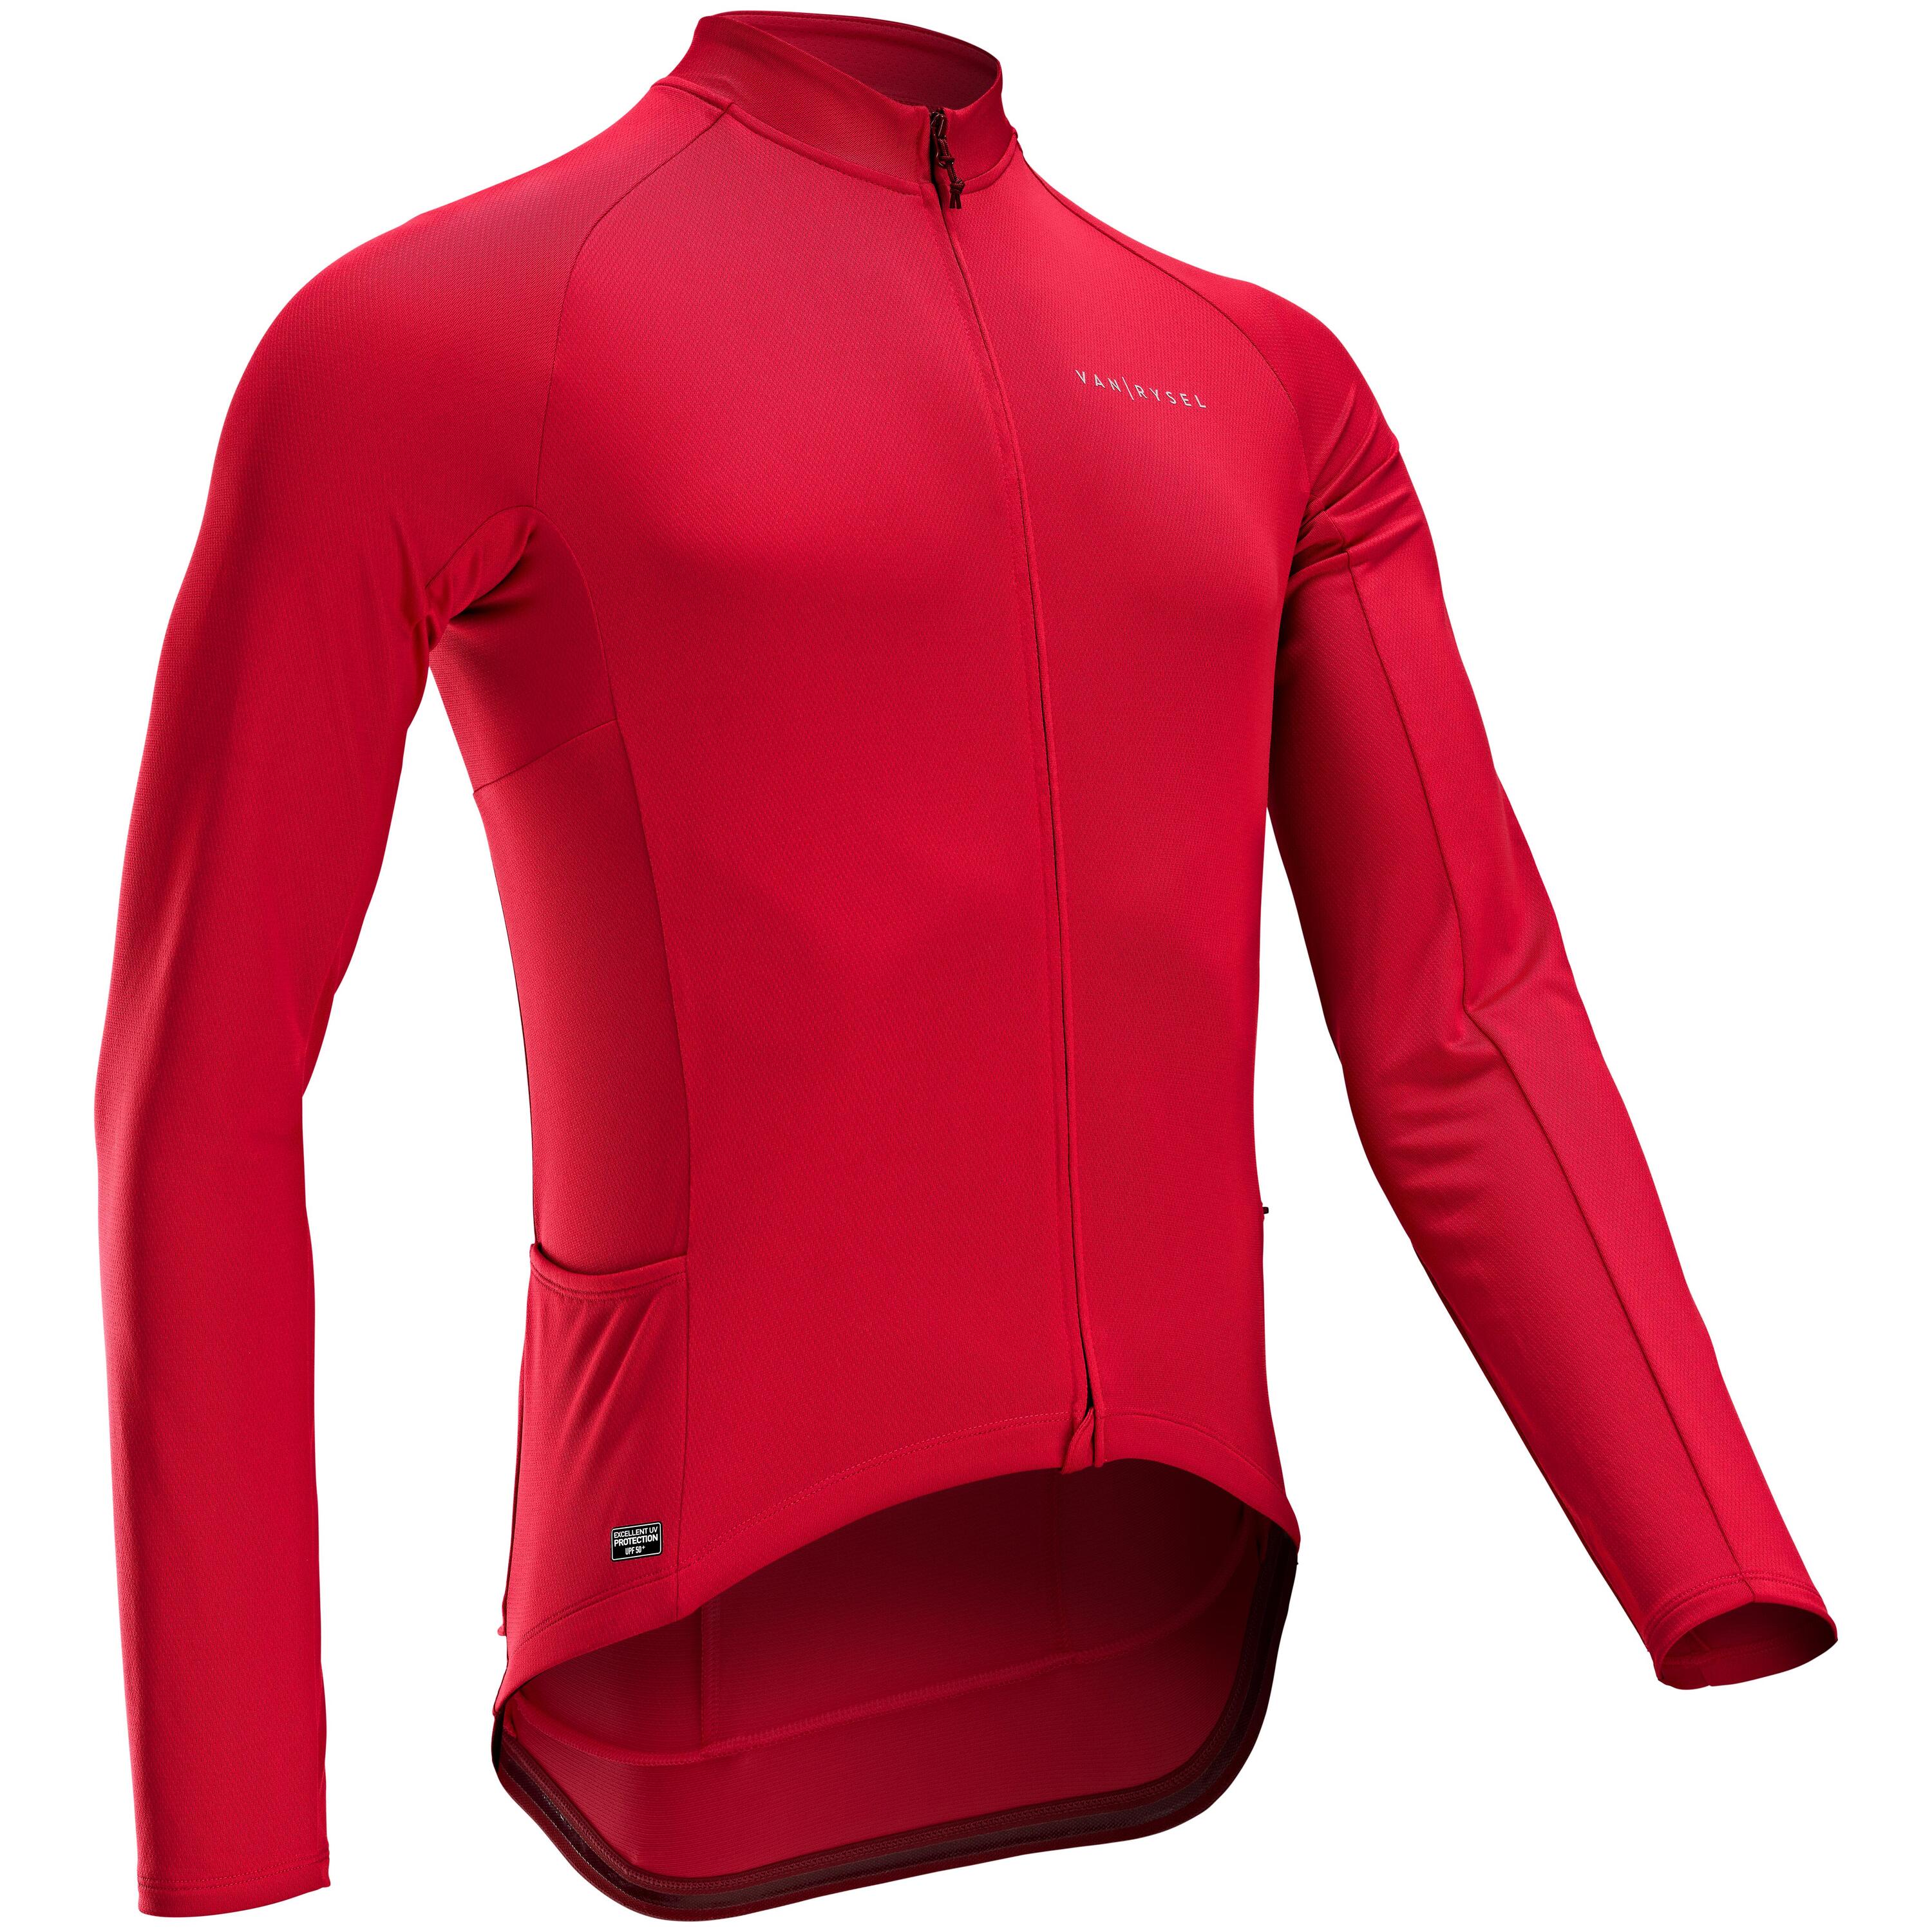 Men's Anti-UV Long-Sleeved Road Cycling Summer Jersey RC100 - Red 3/7